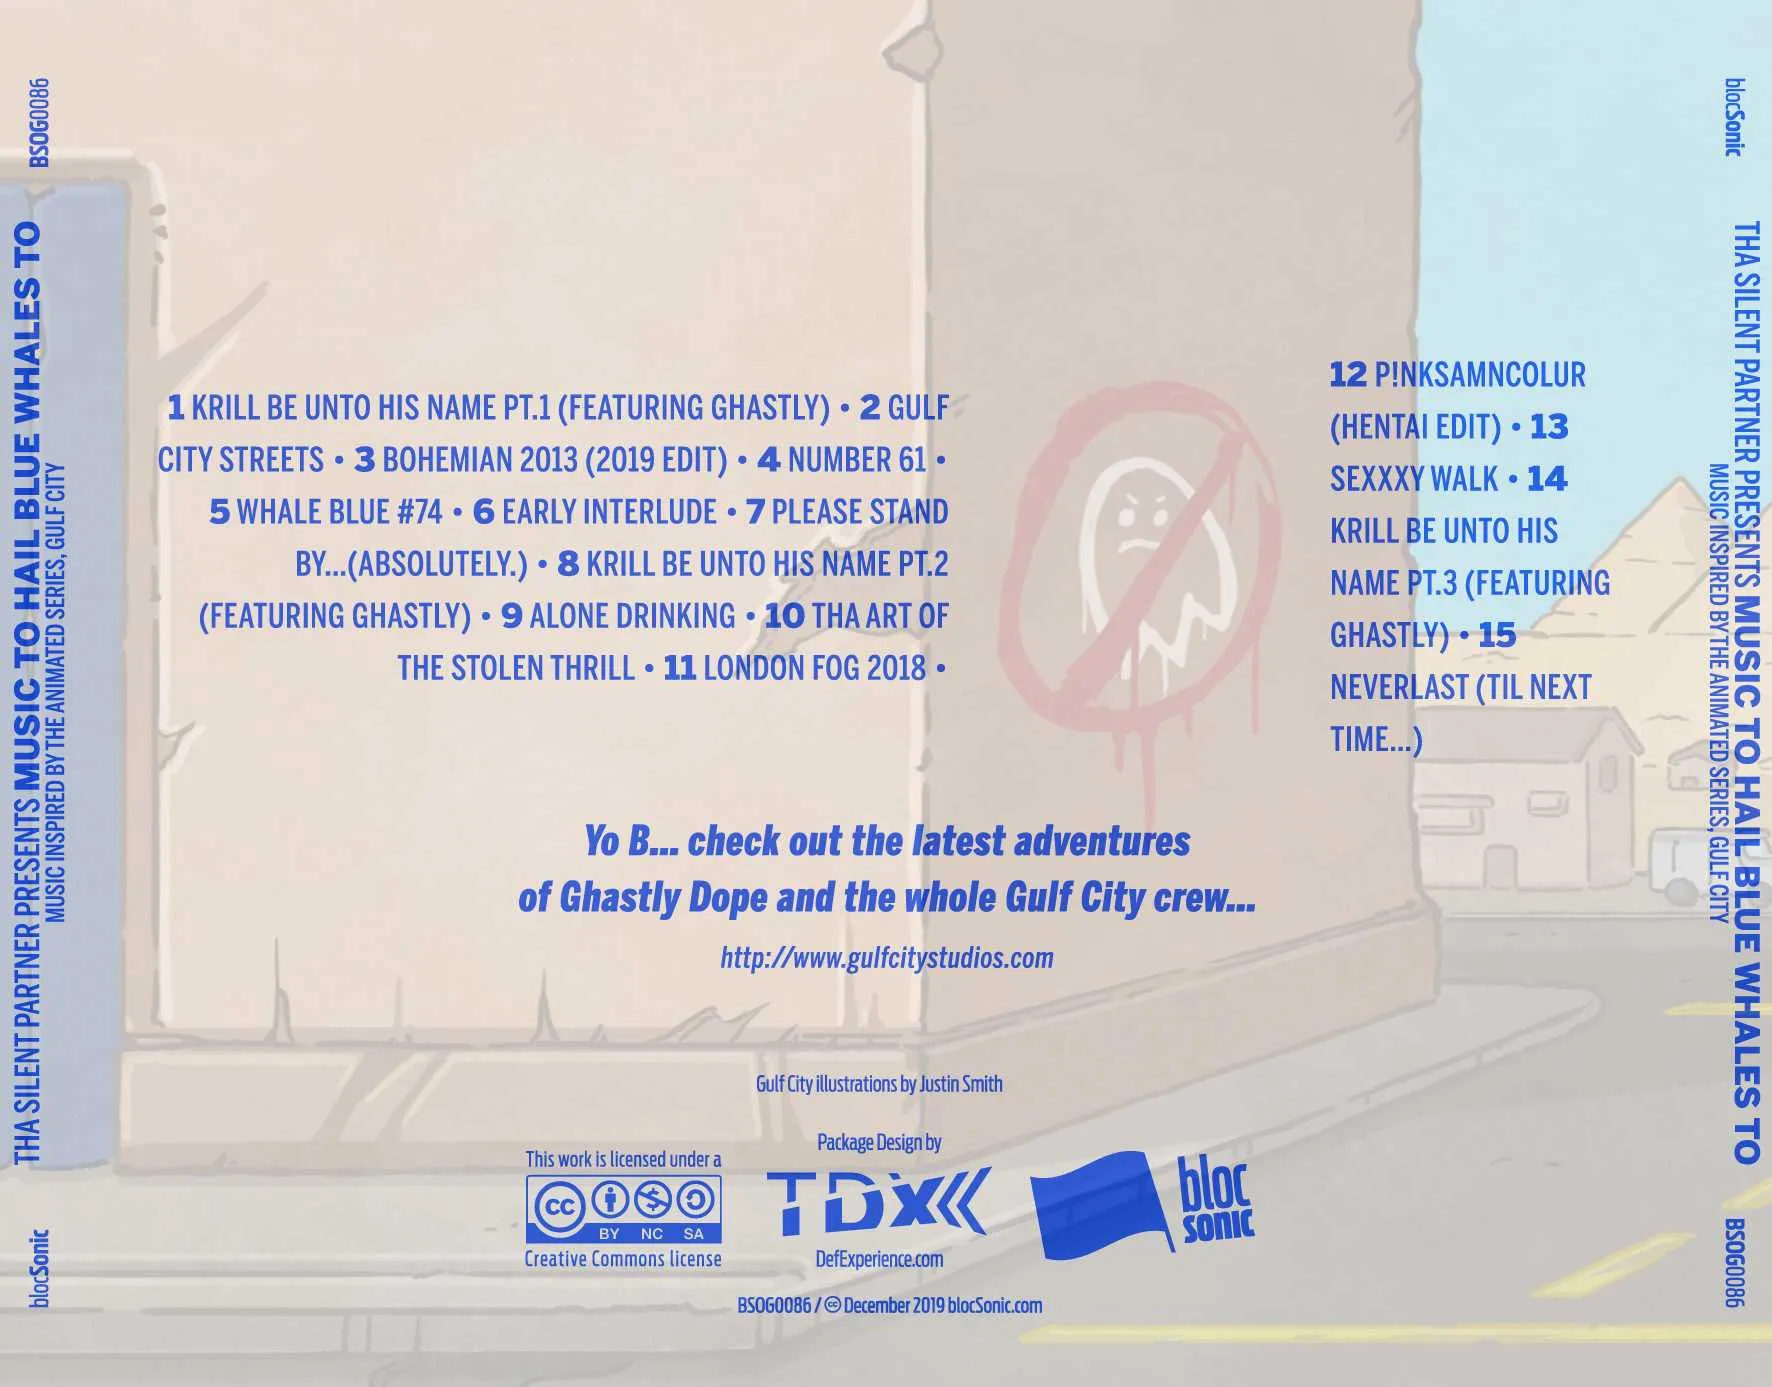 Album traycard for “Music To Hail Blue Whales To (Music Inspired By The Animated Series, Gulf City)” by Tha Silent Partner